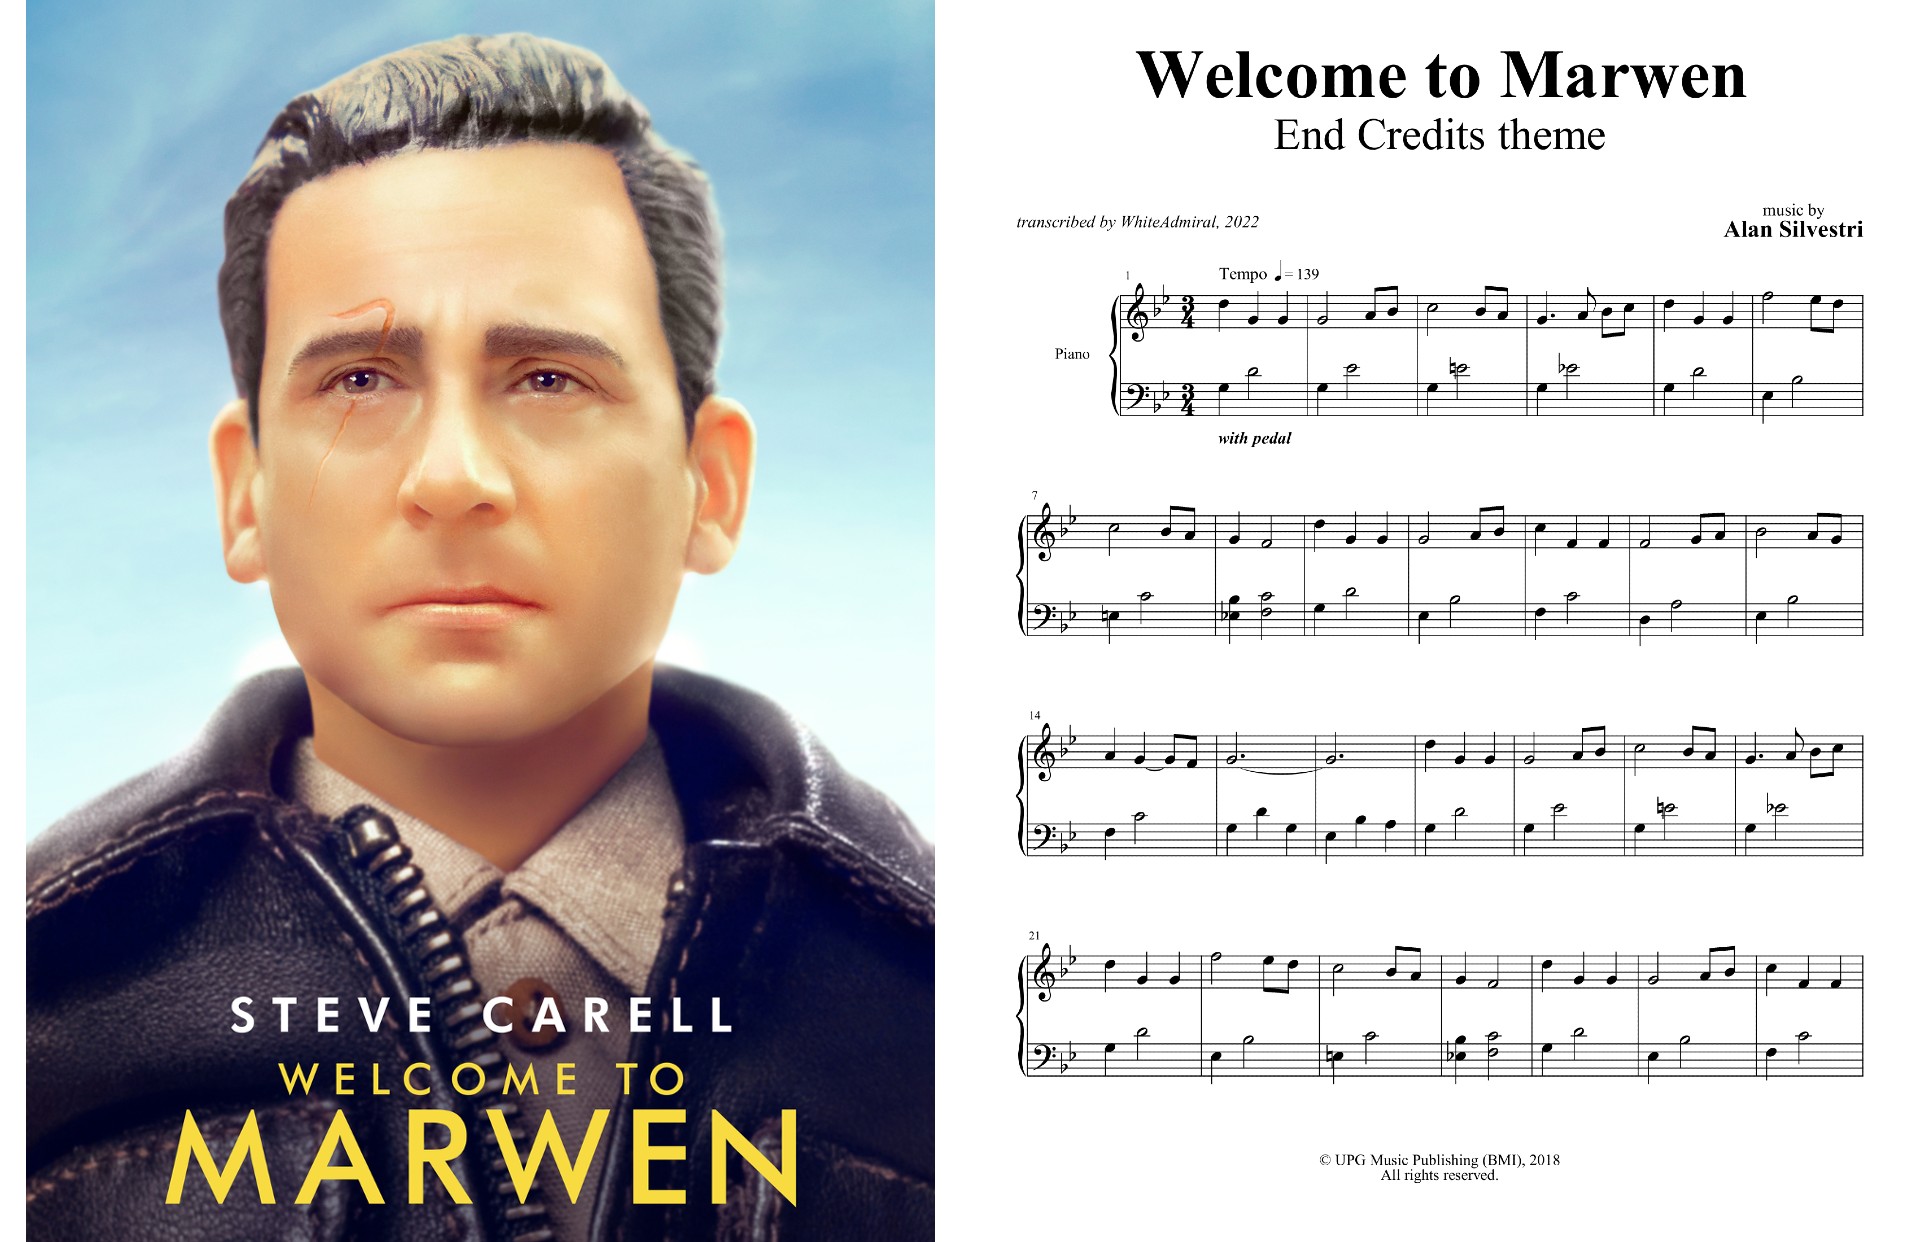 WELCOME TO MARWEN - End Credits theme.jpg